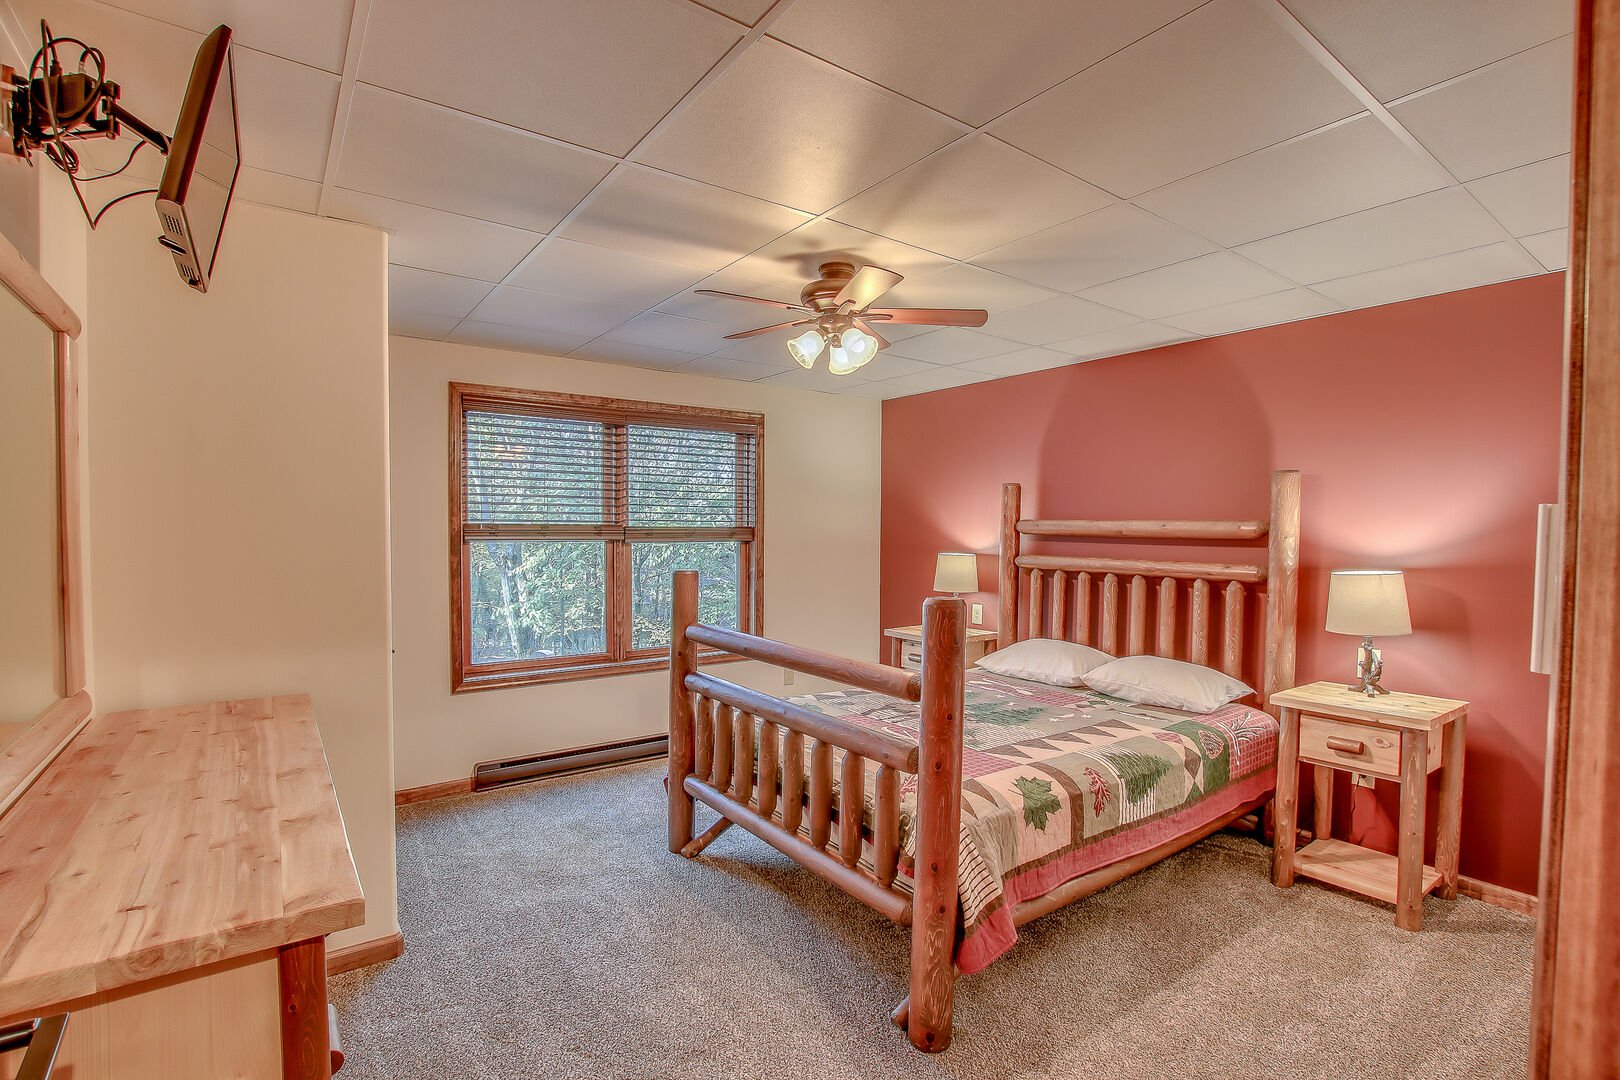 Bedroom with Bed, Nightstands and Ceiling Fan